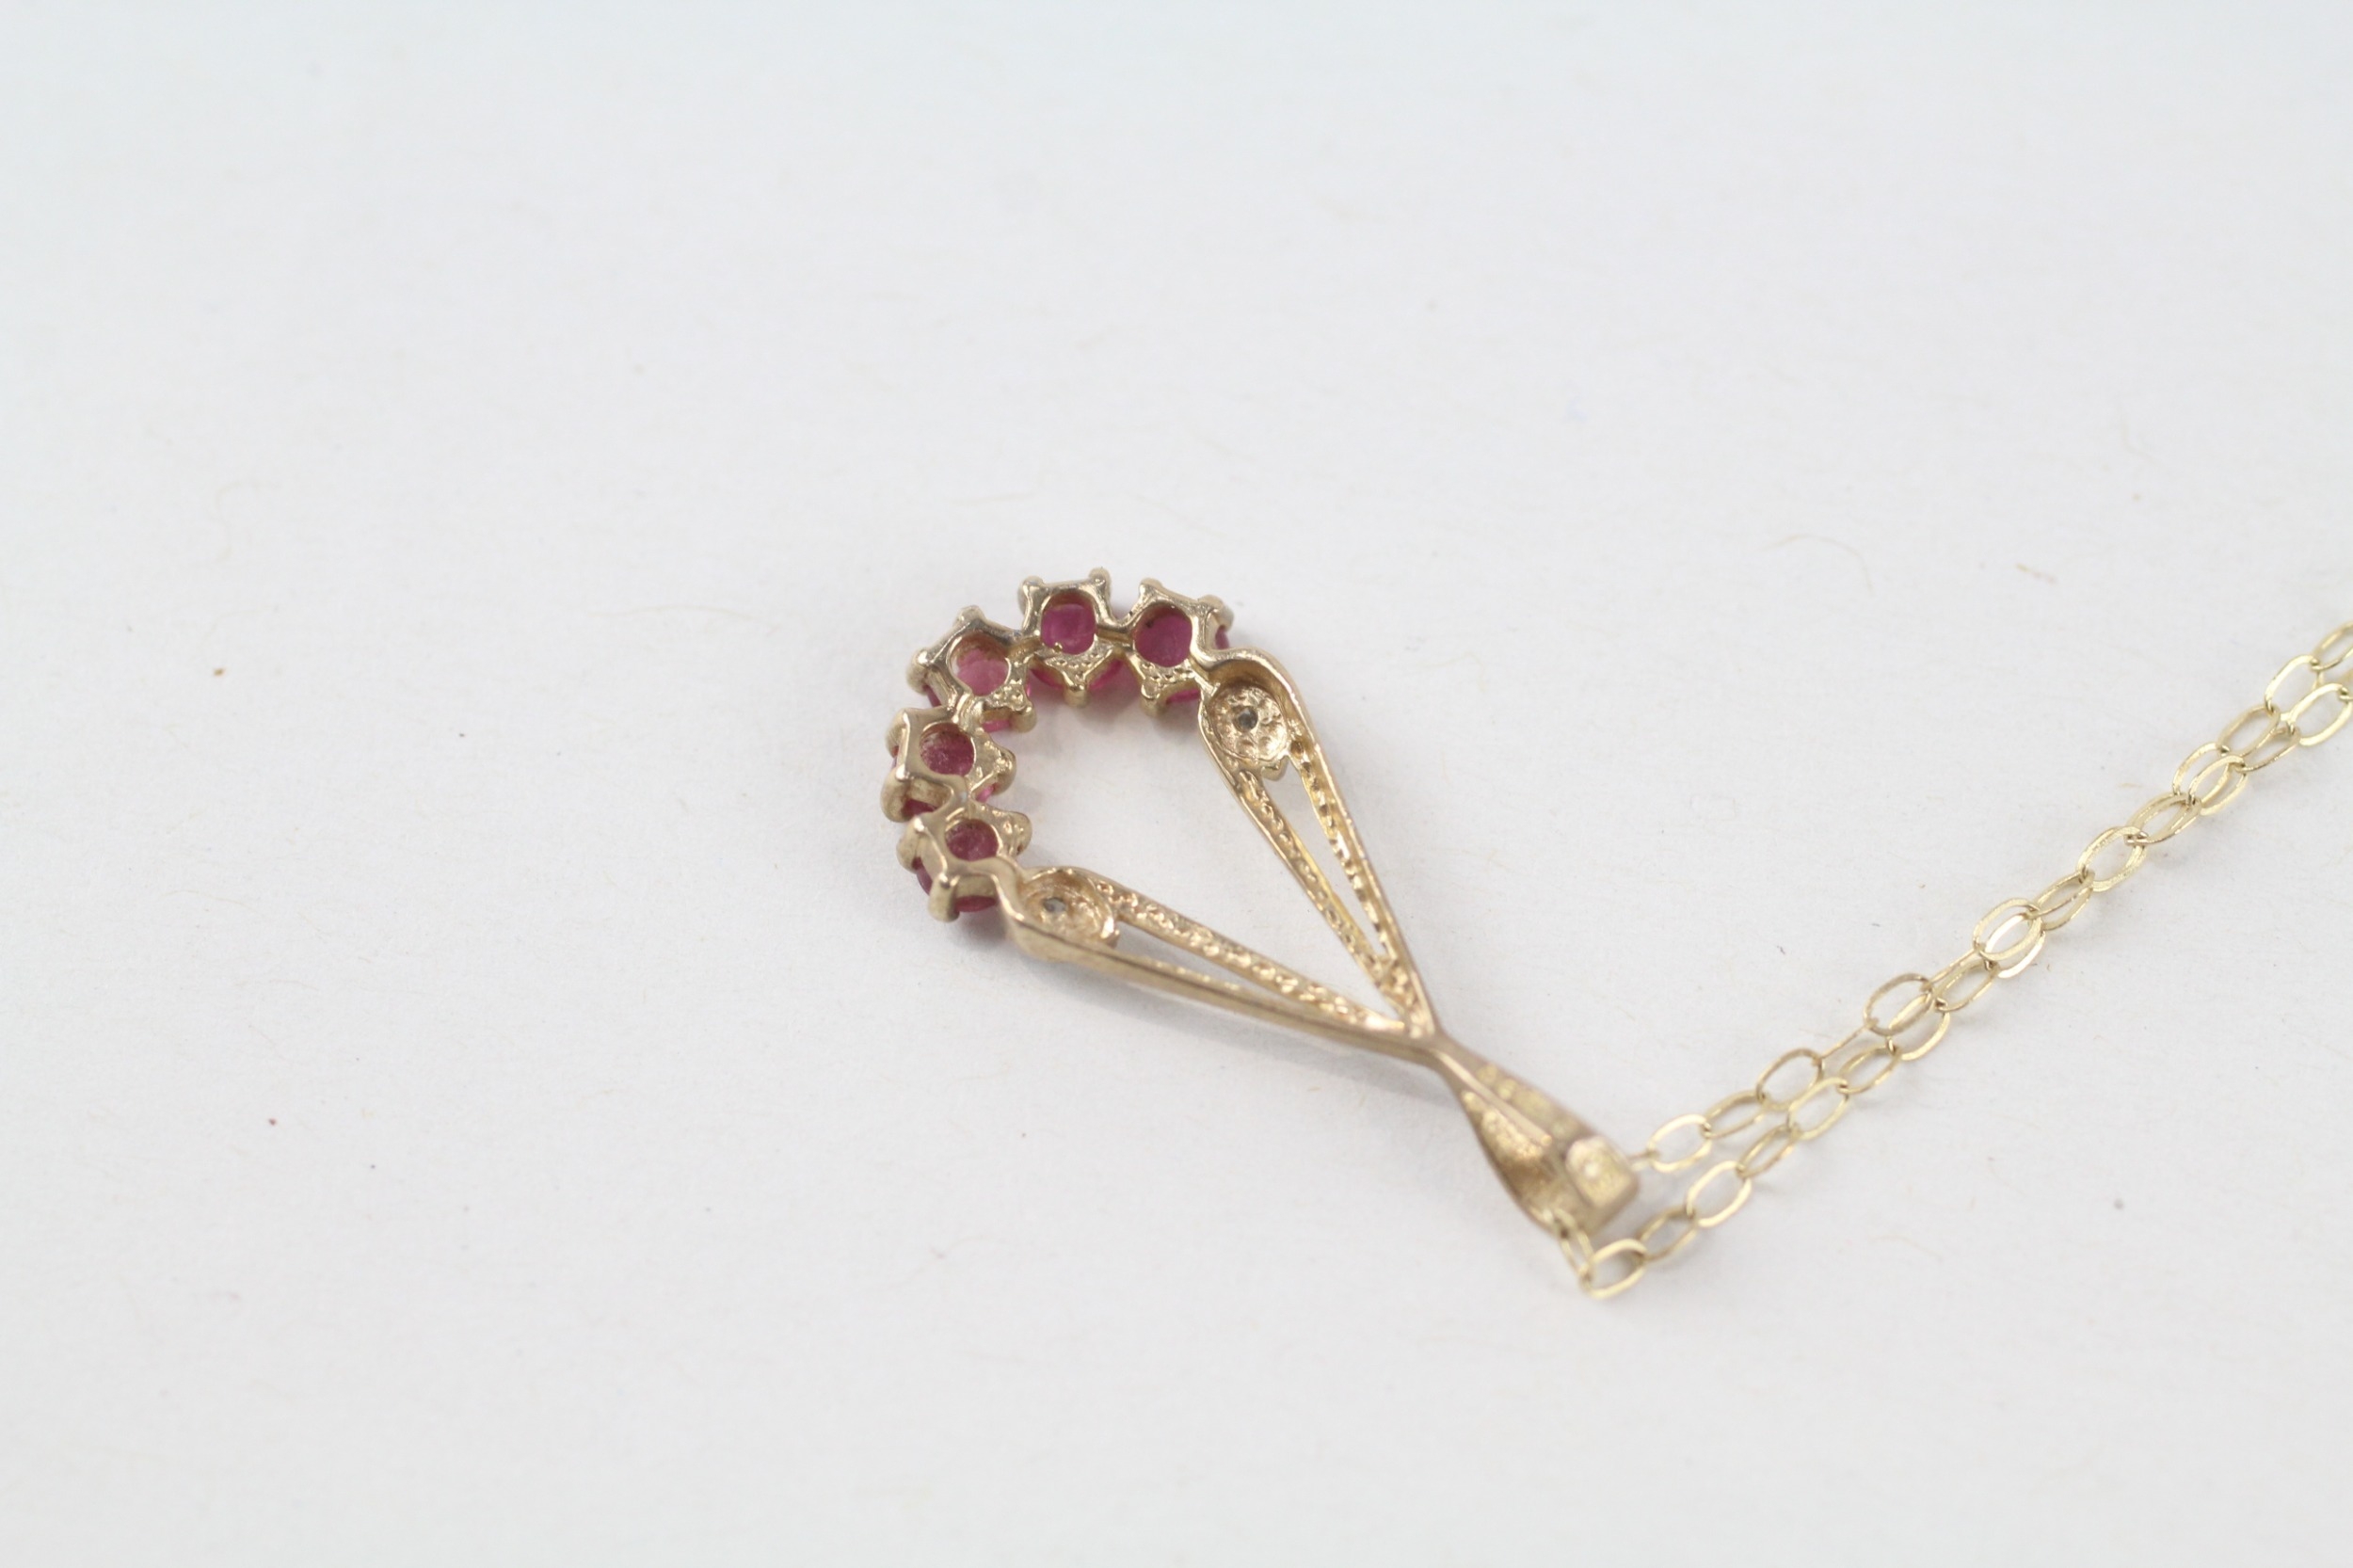 9ct gold 1980's ruby & diamond pendant necklace (1.1g) - Image 4 of 4